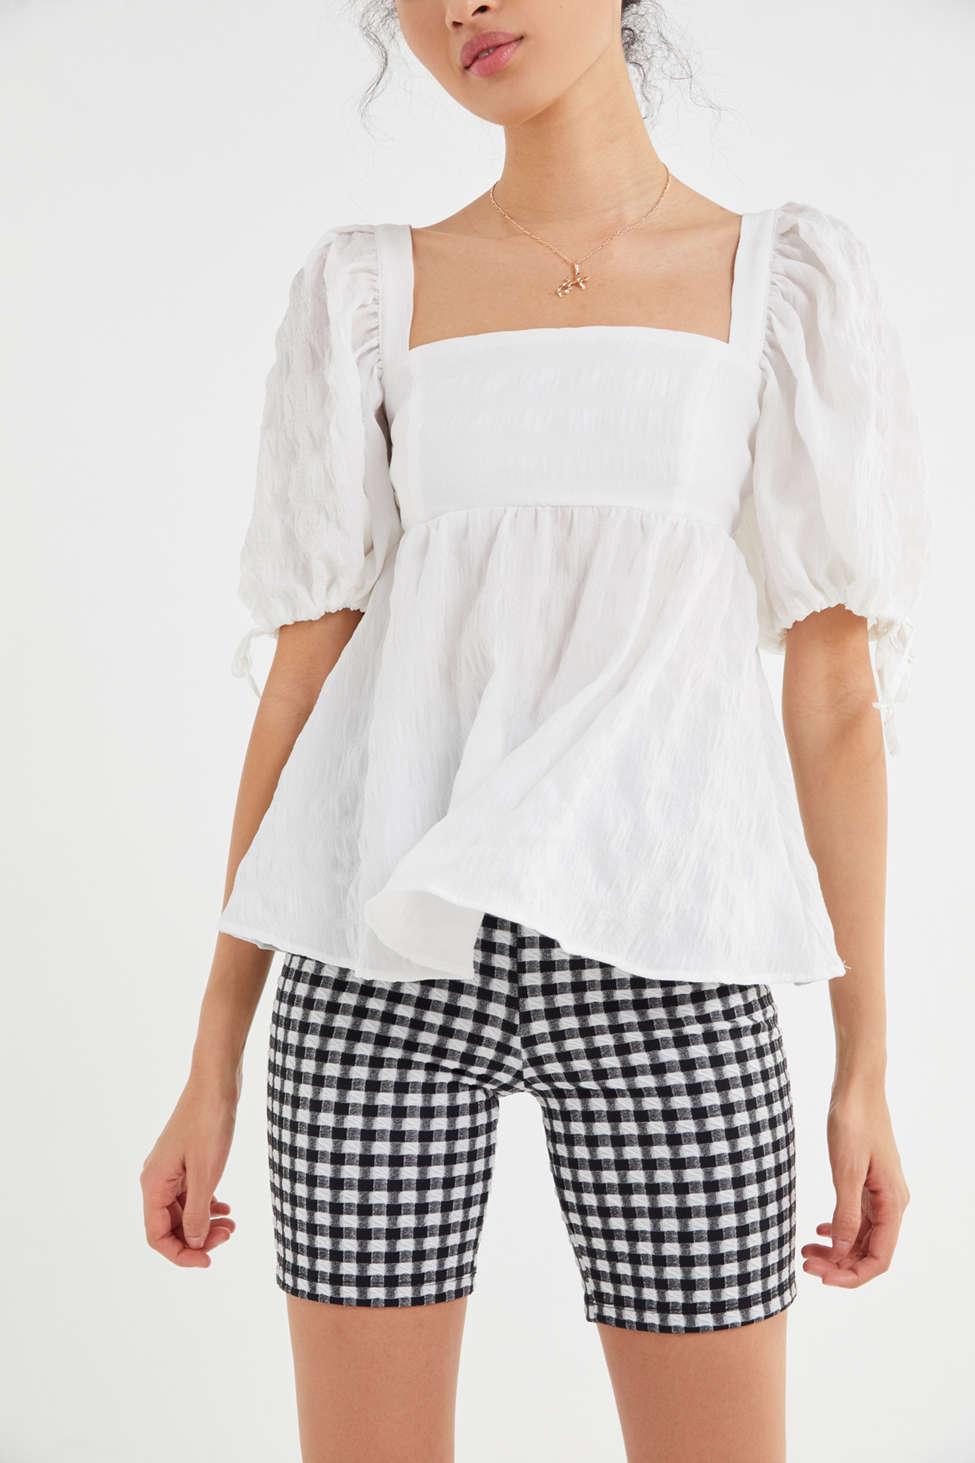 Urban Outfitters Uo Diana Crinkle Puff Sleeve Babydoll Top in White | Lyst